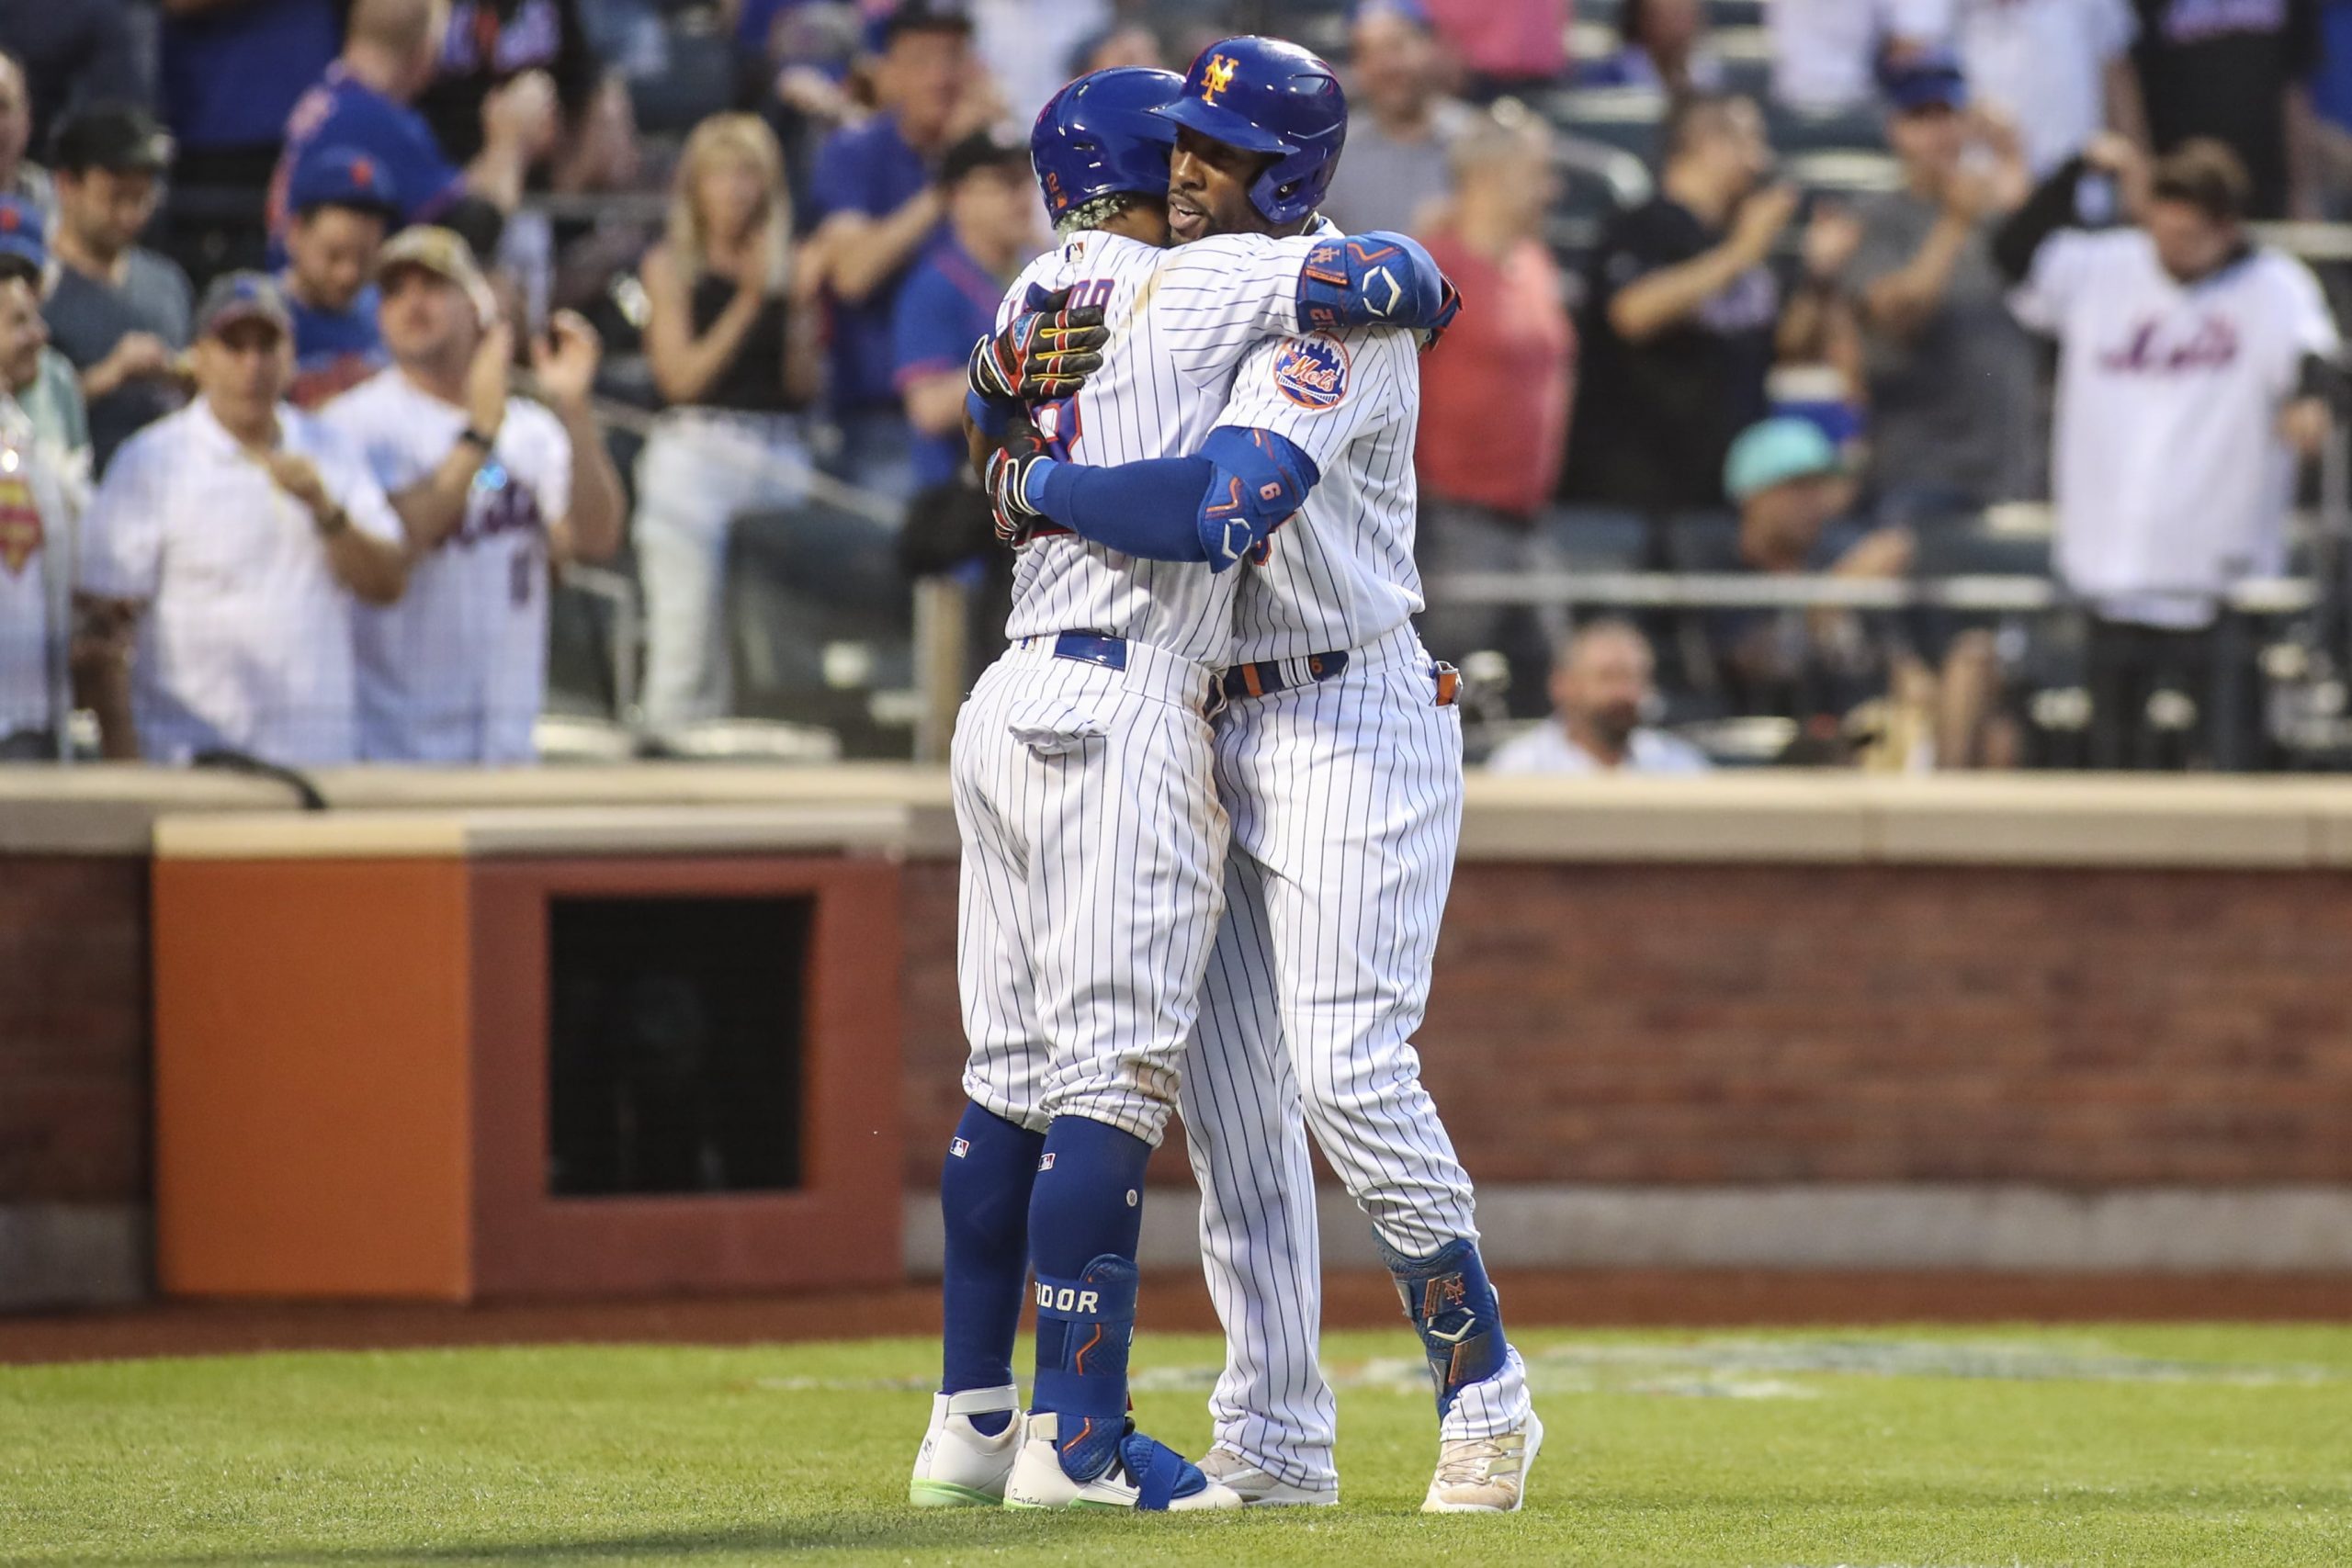 New York Mets right fielder Starling Marte (right) is hugged by shortstop Fransisco Lindor (left) after hitting a two-run home run in the second inning against the Washington Nationals at Citi Field.